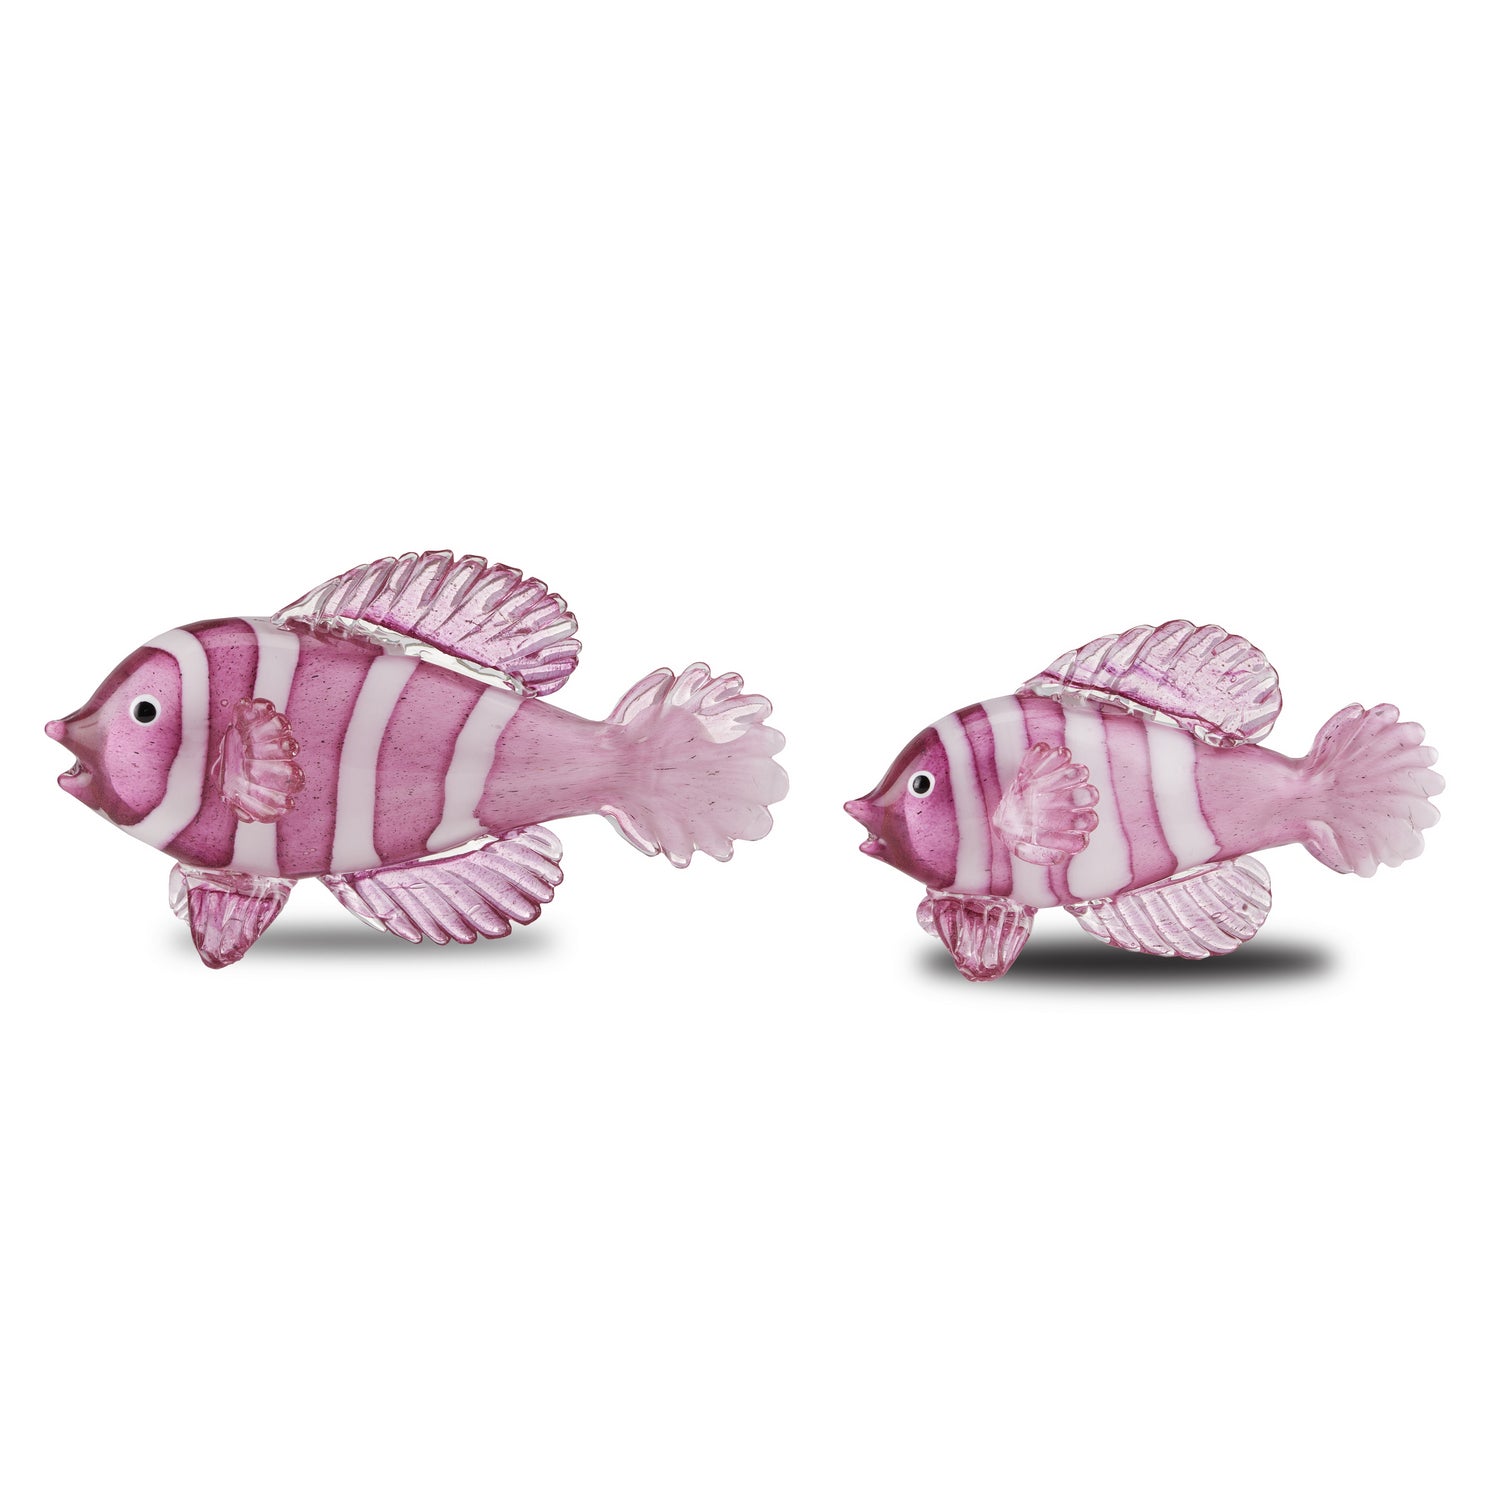 Currey and Company - 1200-0563 - Fish Set of 2 - Rialto - Pink/White